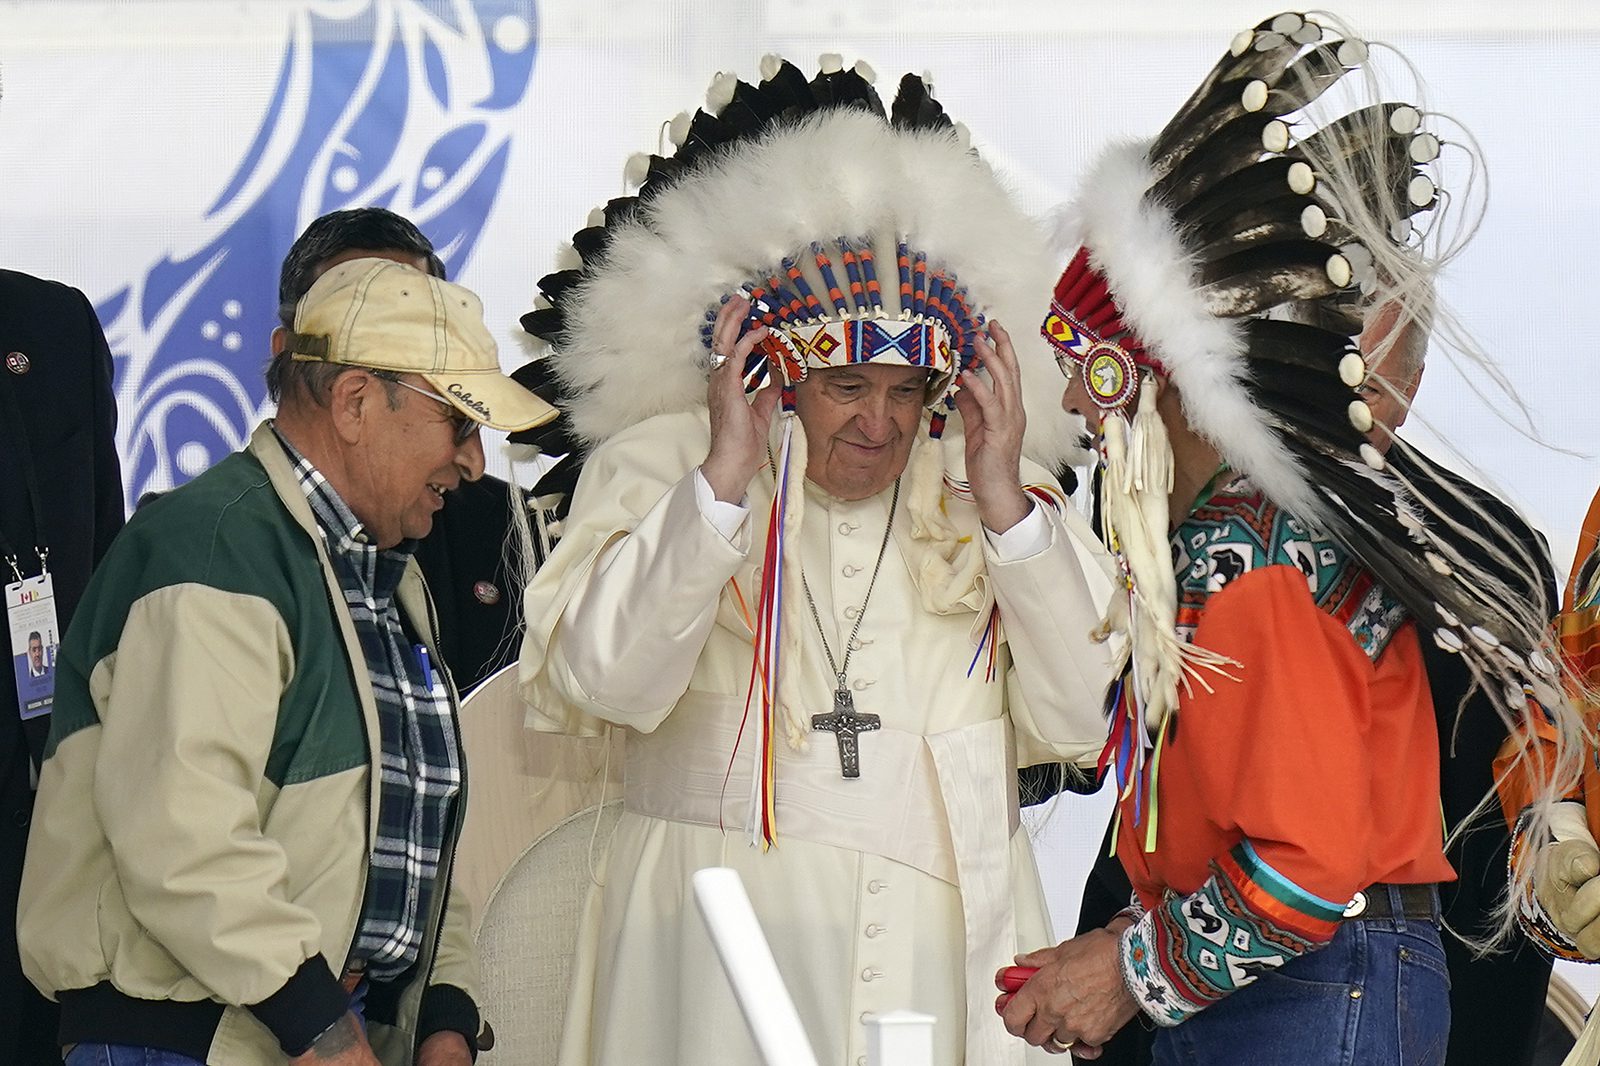 Pope Francis puts on an Indigenous headdress during a meeting with Indigenous communities, including First Nations, Métis and Inuit, at Our Lady of Seven Sorrows Catholic Church in Maskwacis, near Edmonton, Canada, Monday, July 25, 2022. Pope Francis begins a "penitential" visit to Canada to beg forgiveness from survivors of the country's residential schools, where Catholic missionaries contributed to the "cultural genocide" of generations of Indigenous children by trying to stamp out their languages, cultures and traditions. Francis is set to visit the cemetery at the former residential school in Maskwacis. (AP Photo/Eric Gay)